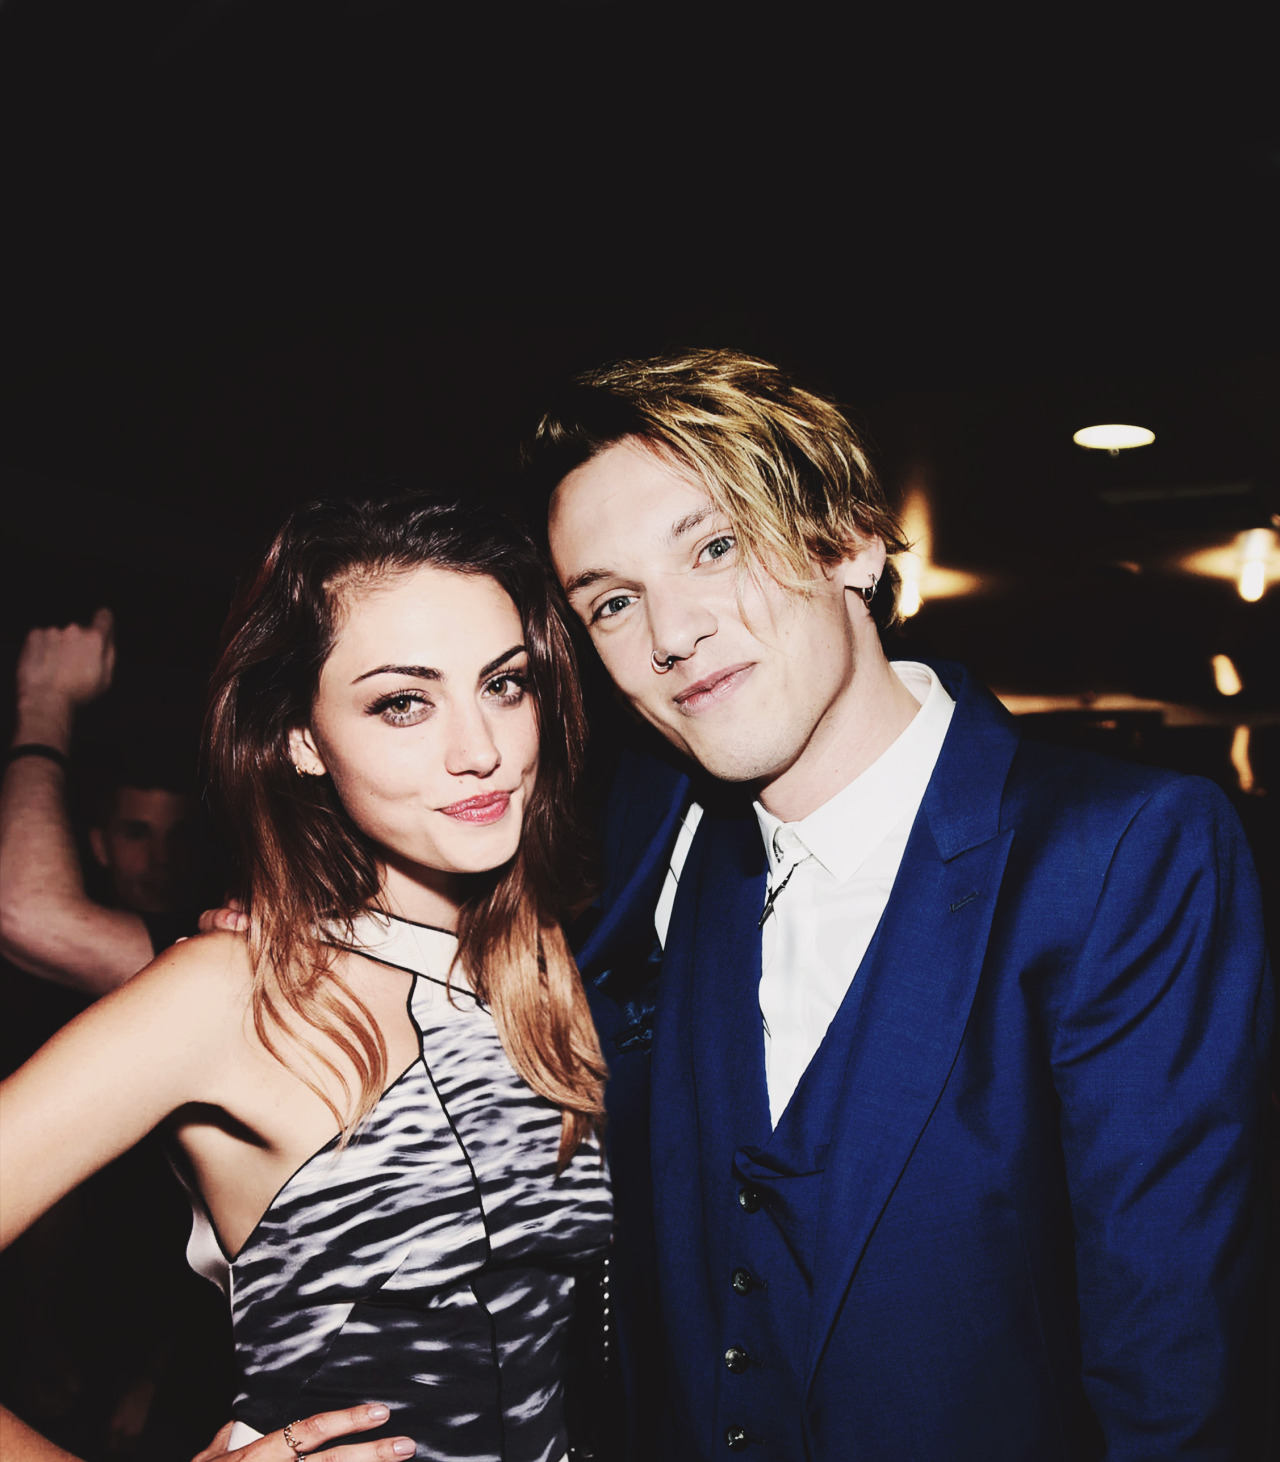 The Manip Company — Jamie Campbell Bower x Phoebe Tonkin Requested